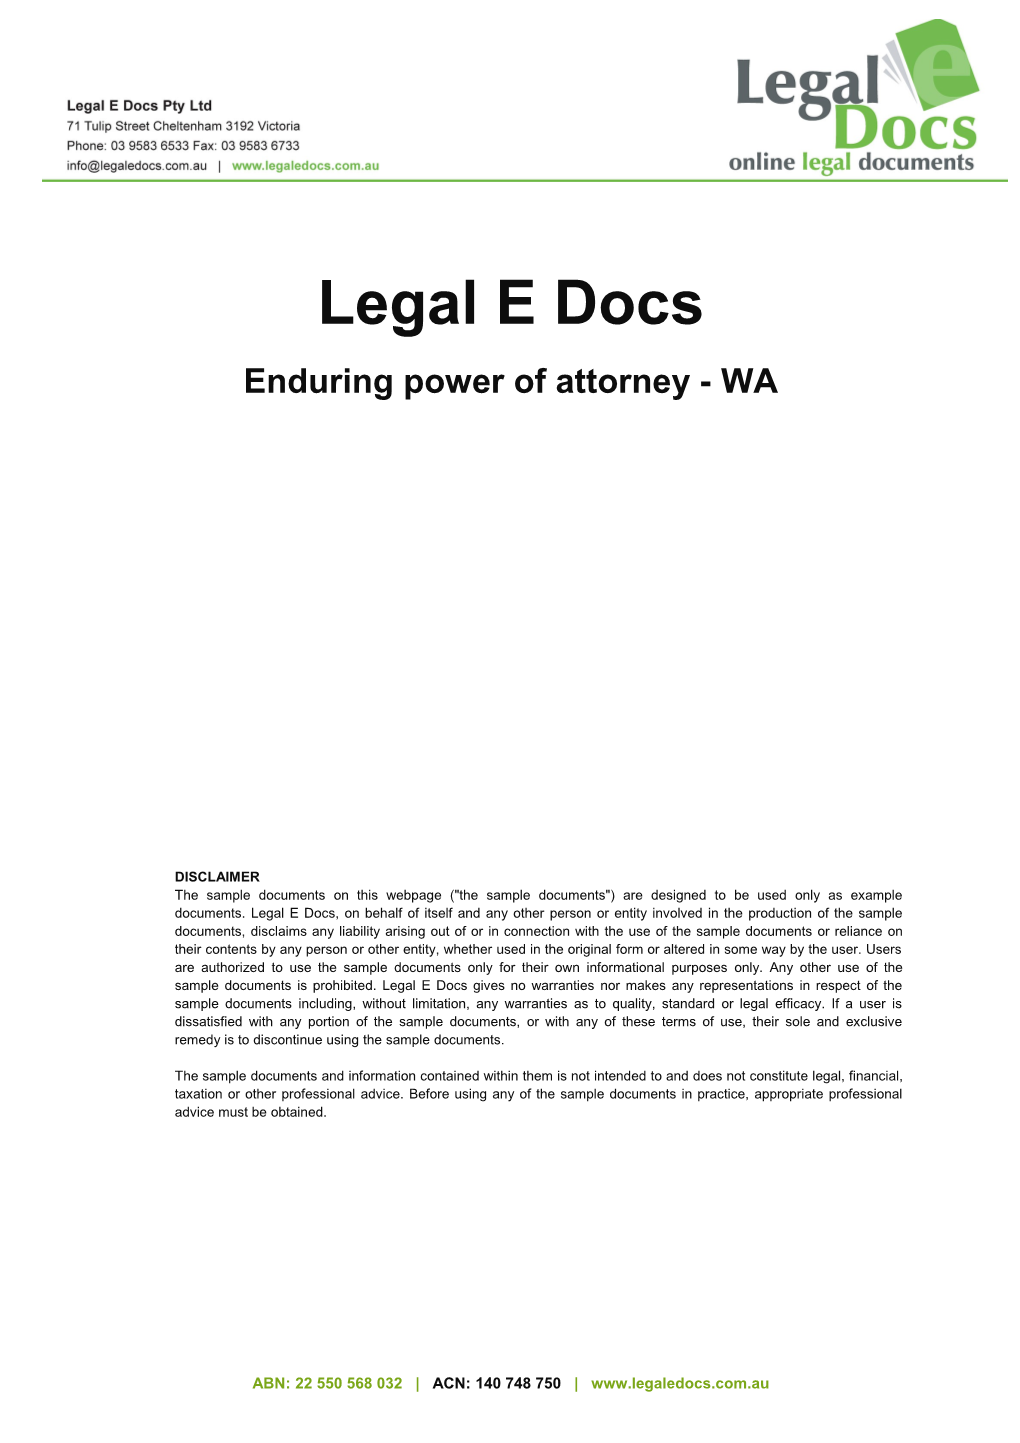 Enduring Power of Attorney Form 1 Guardianship and Administration Act 1990 Western Australia